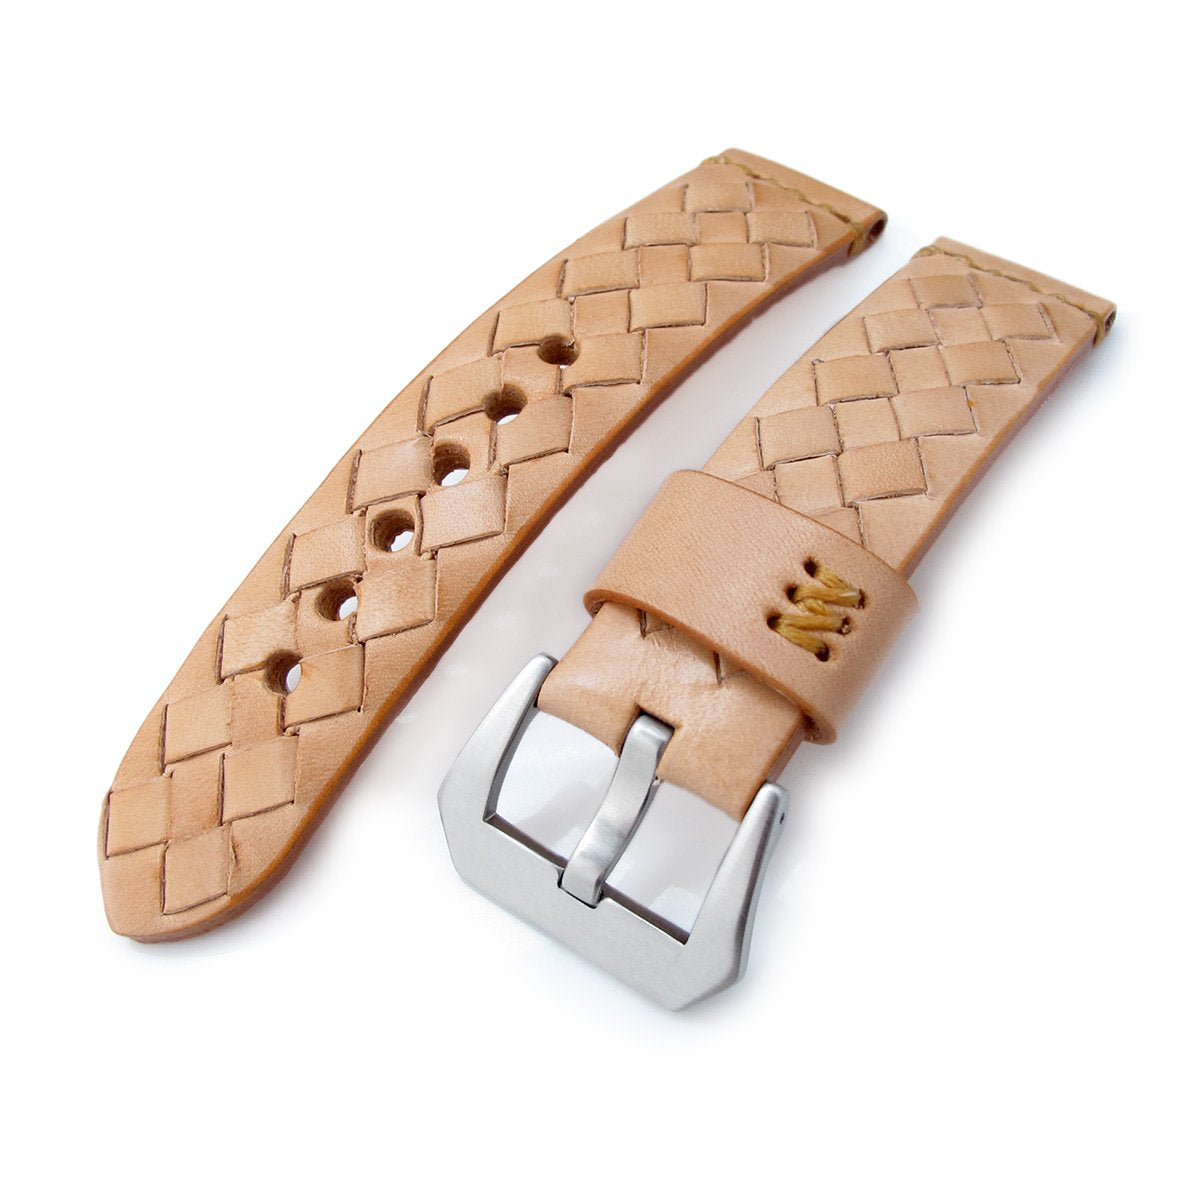 MiLTAT Zizz Collection 22mm Braided Calf Leather Watch Strap LV Beige Tan Stitches Strapcode Watch Bands